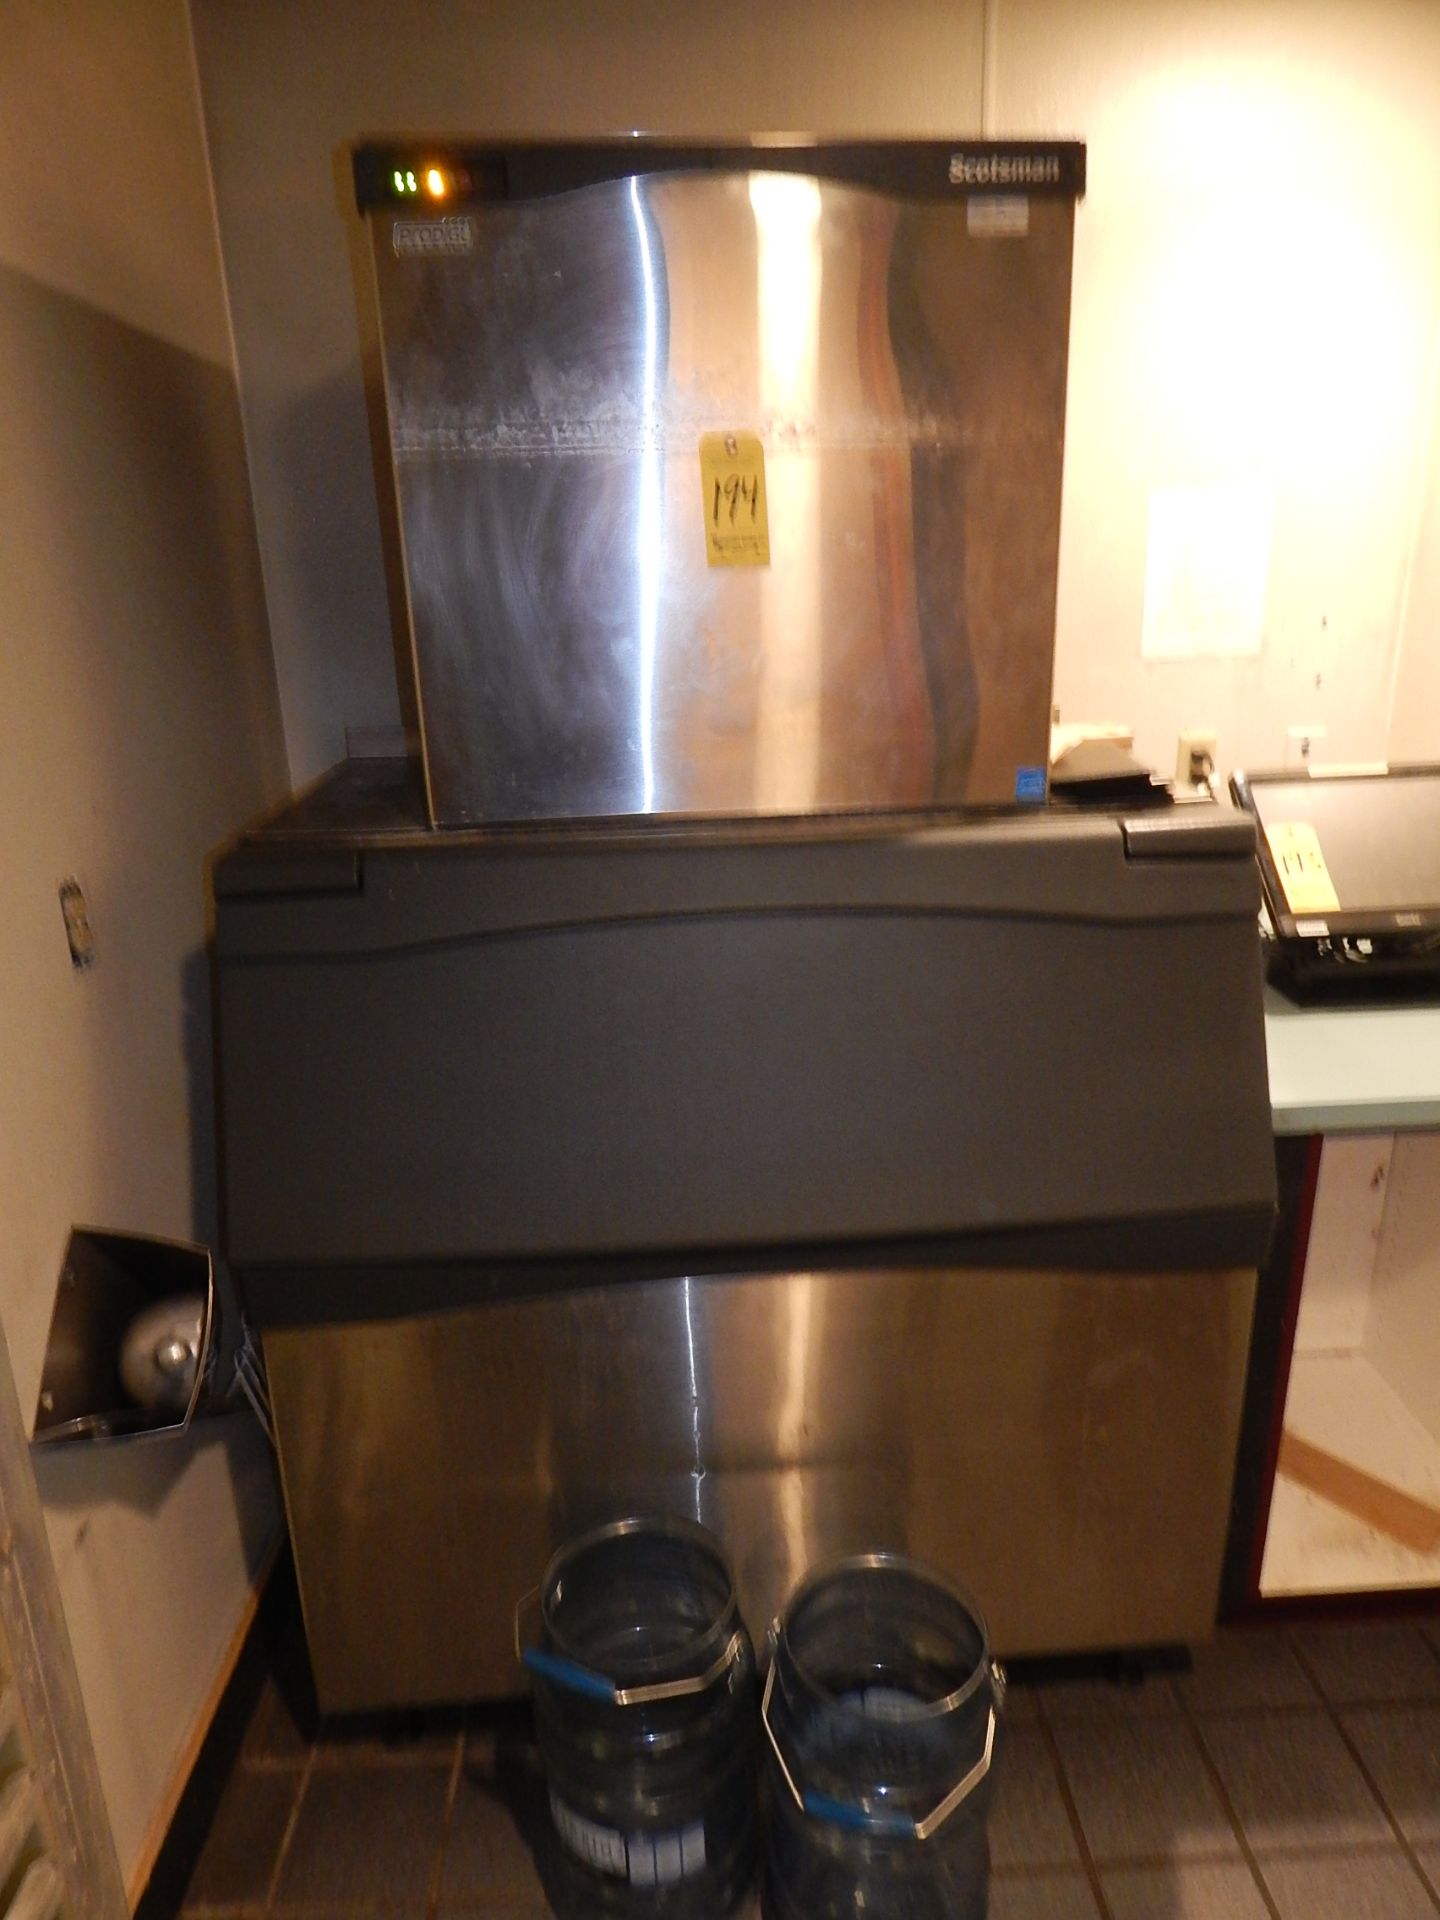 Scotsman Prodigy Ice Machine with Scoops and Ice Buckets - Image 3 of 4